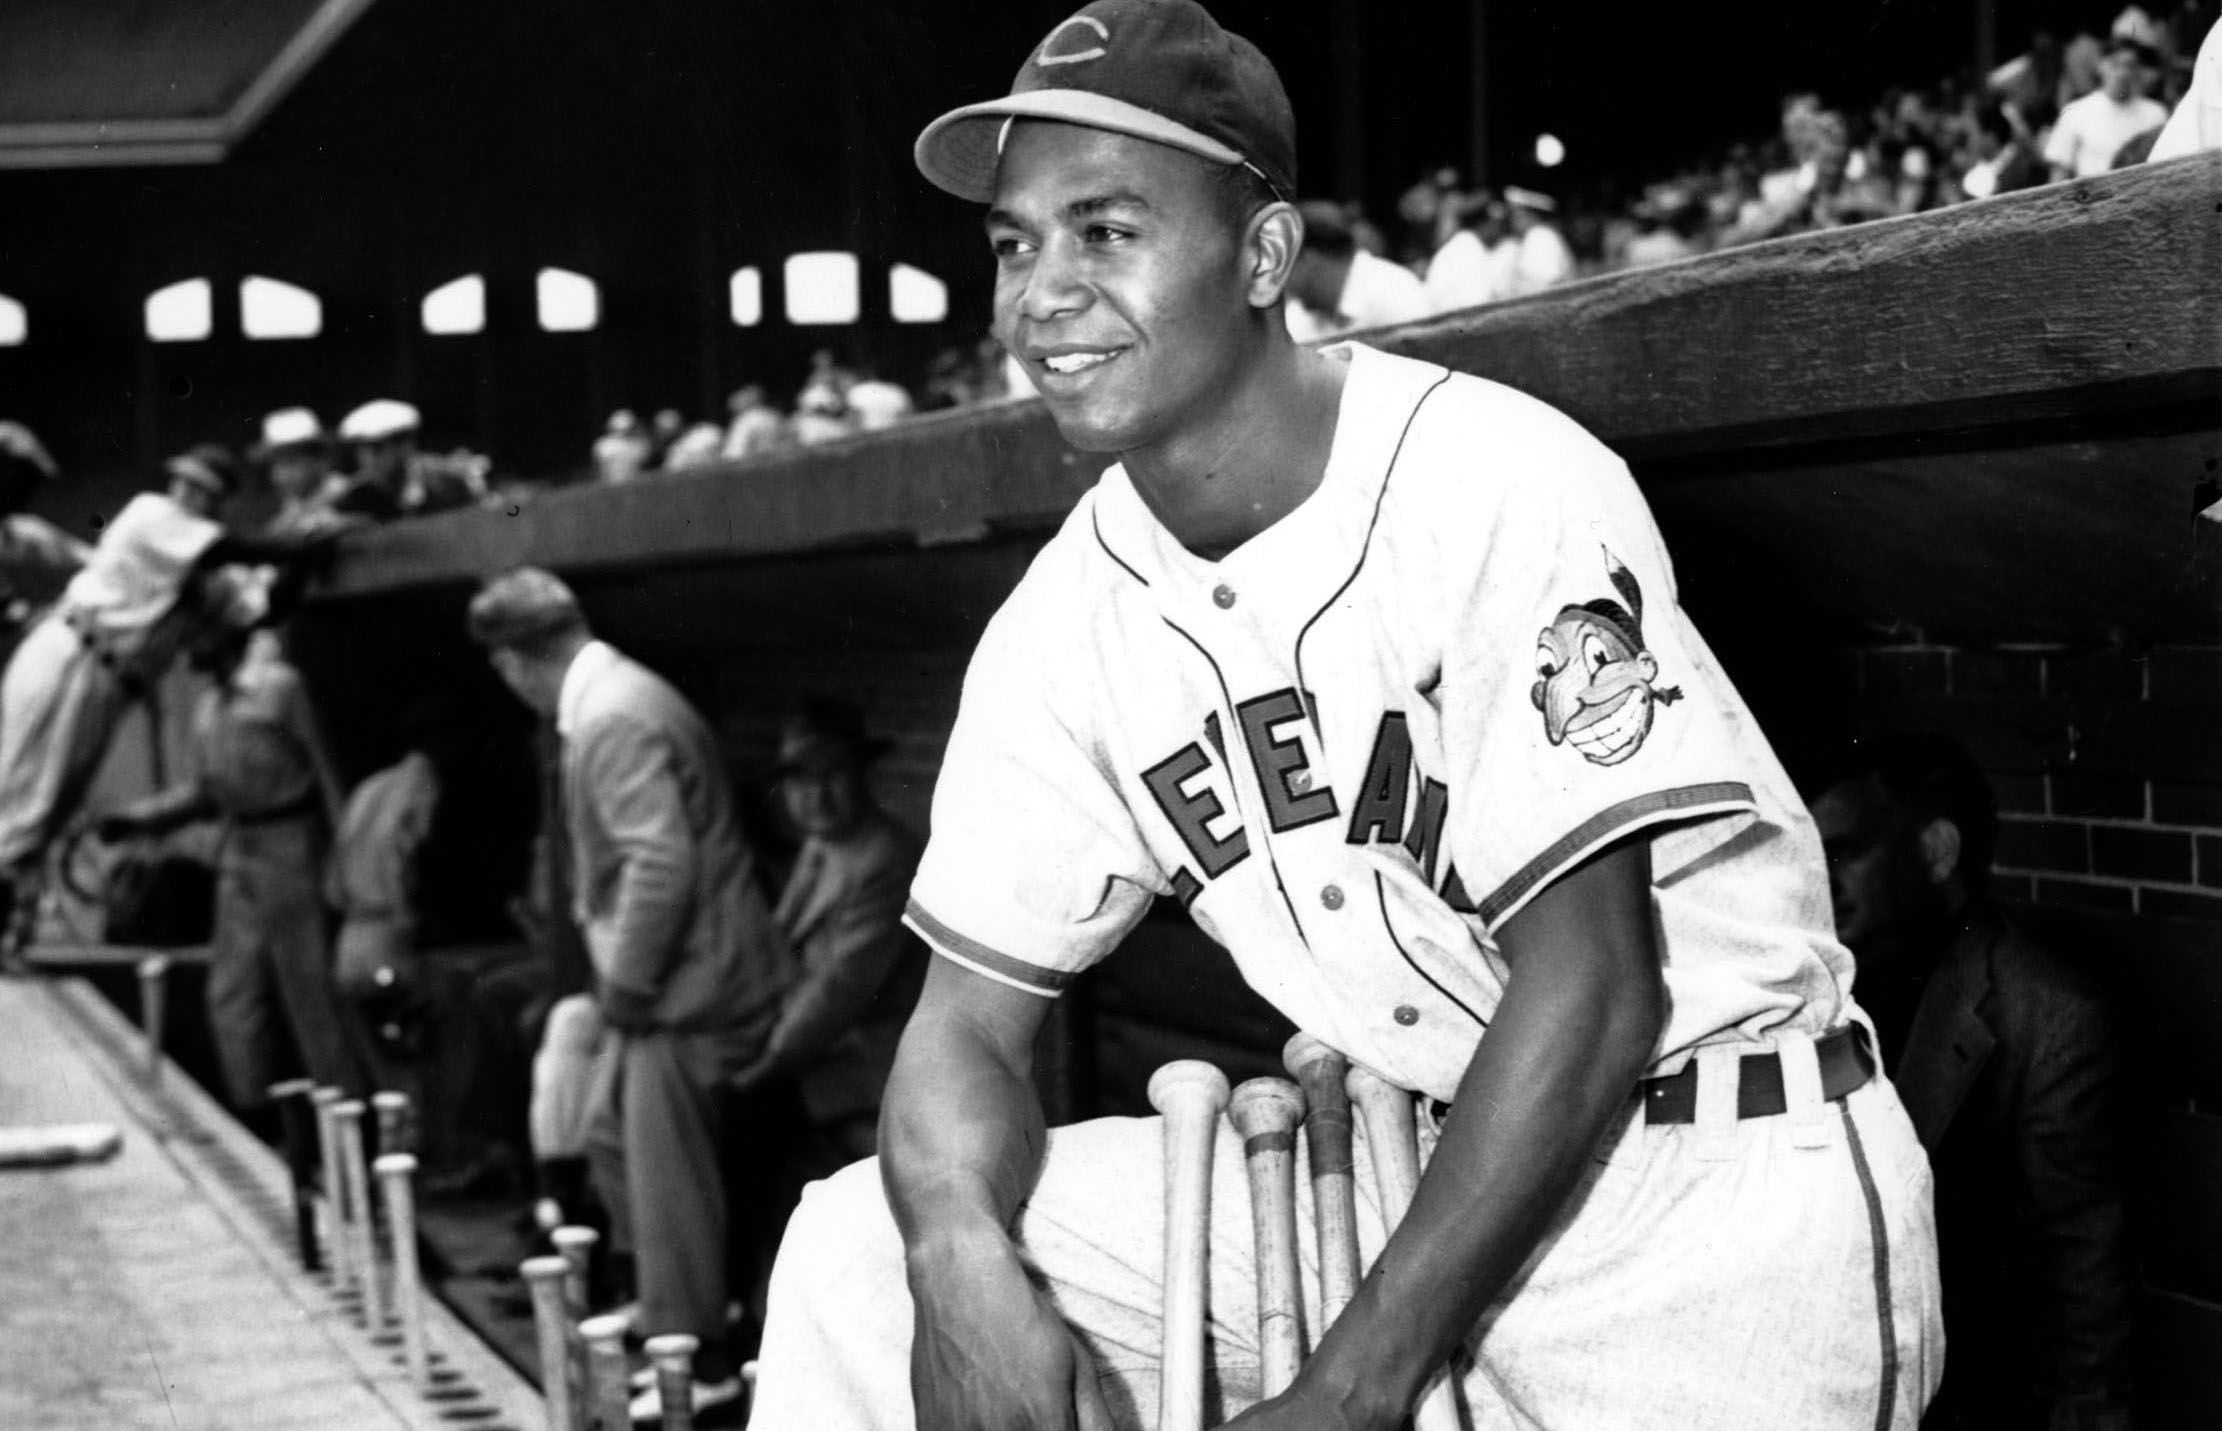 N.J. will now celebrate Larry Doby Day in honor of the man who